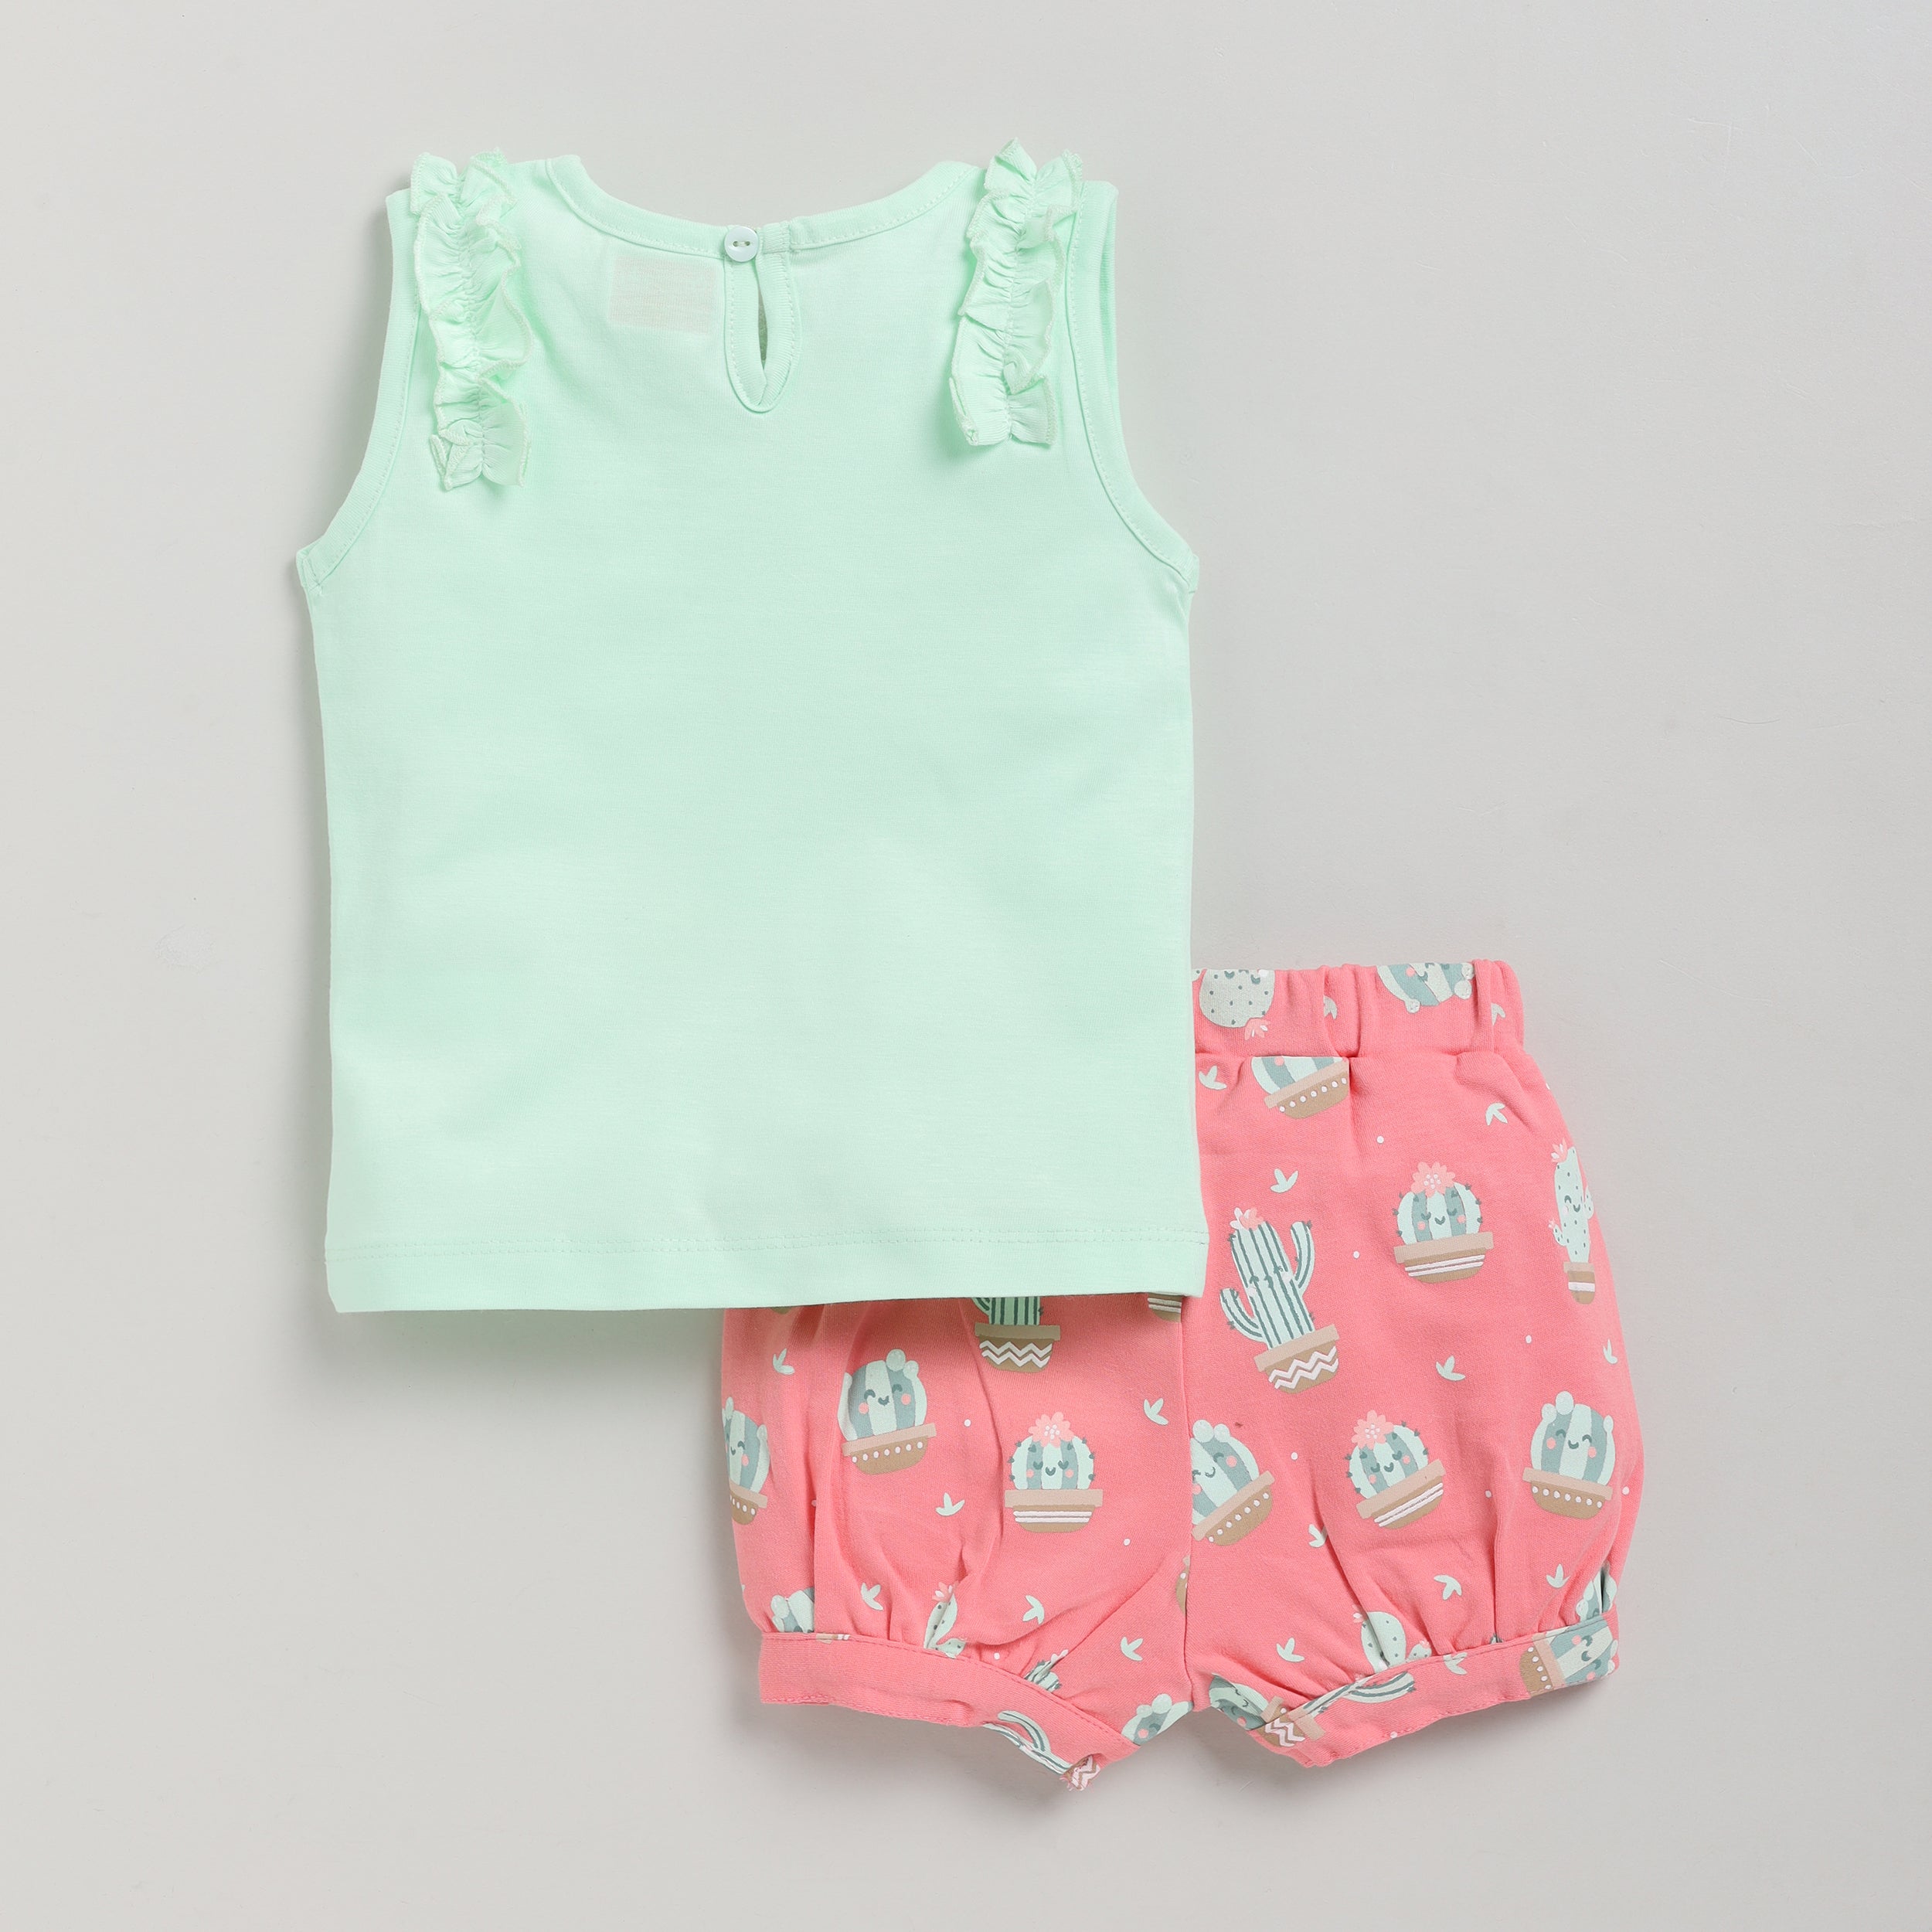 Snuggly Monkey Girls Cute Cactus Print Top with Shorts